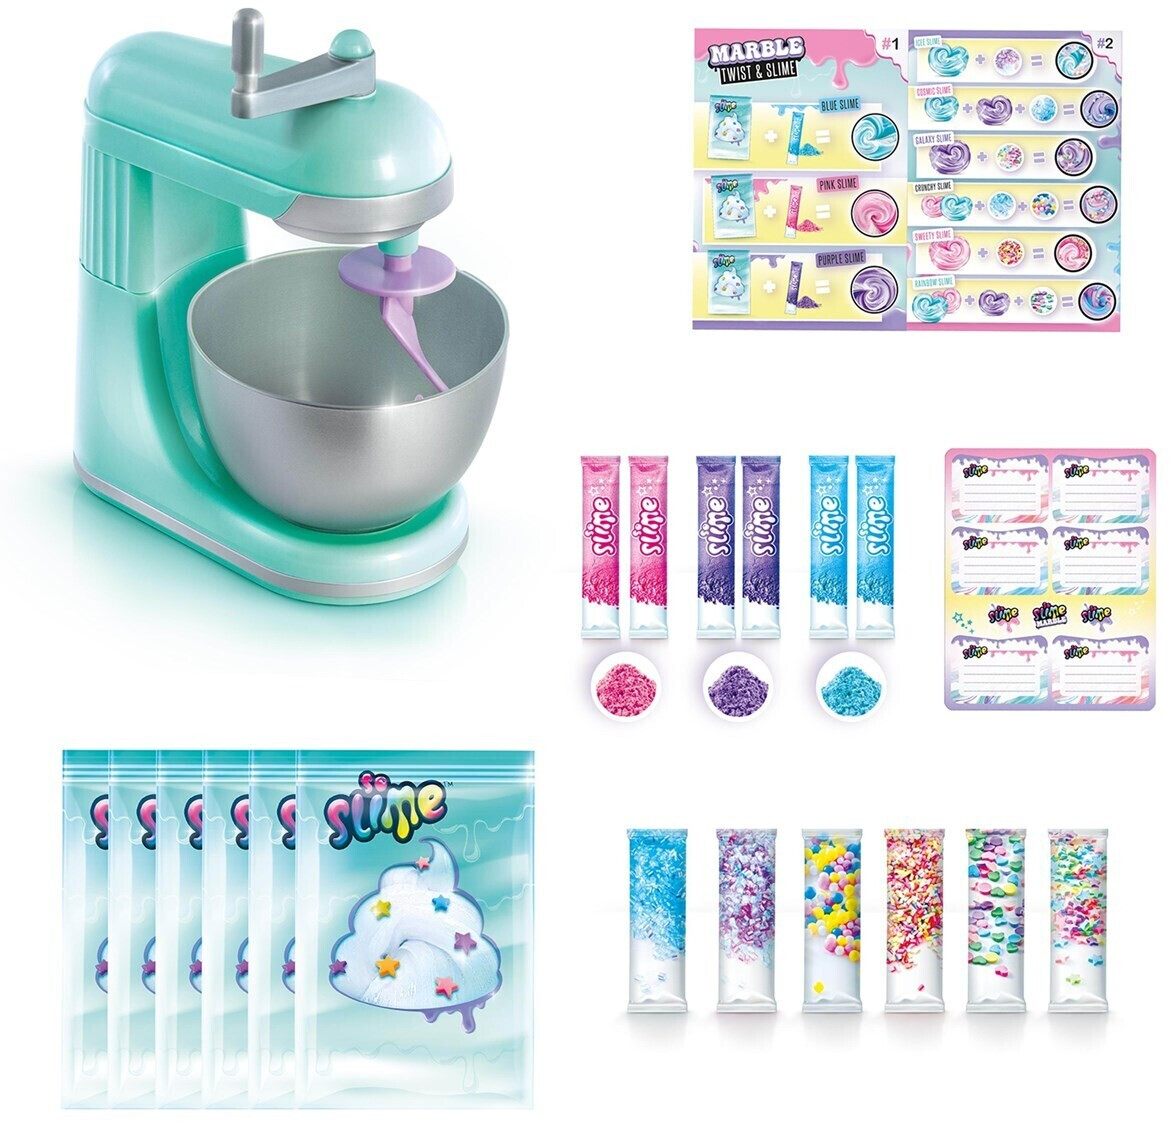 Get Ready to Twist and Slime: Introducing the So Slime Twist 'n' Slime  Mixer! - Canal Toys UK